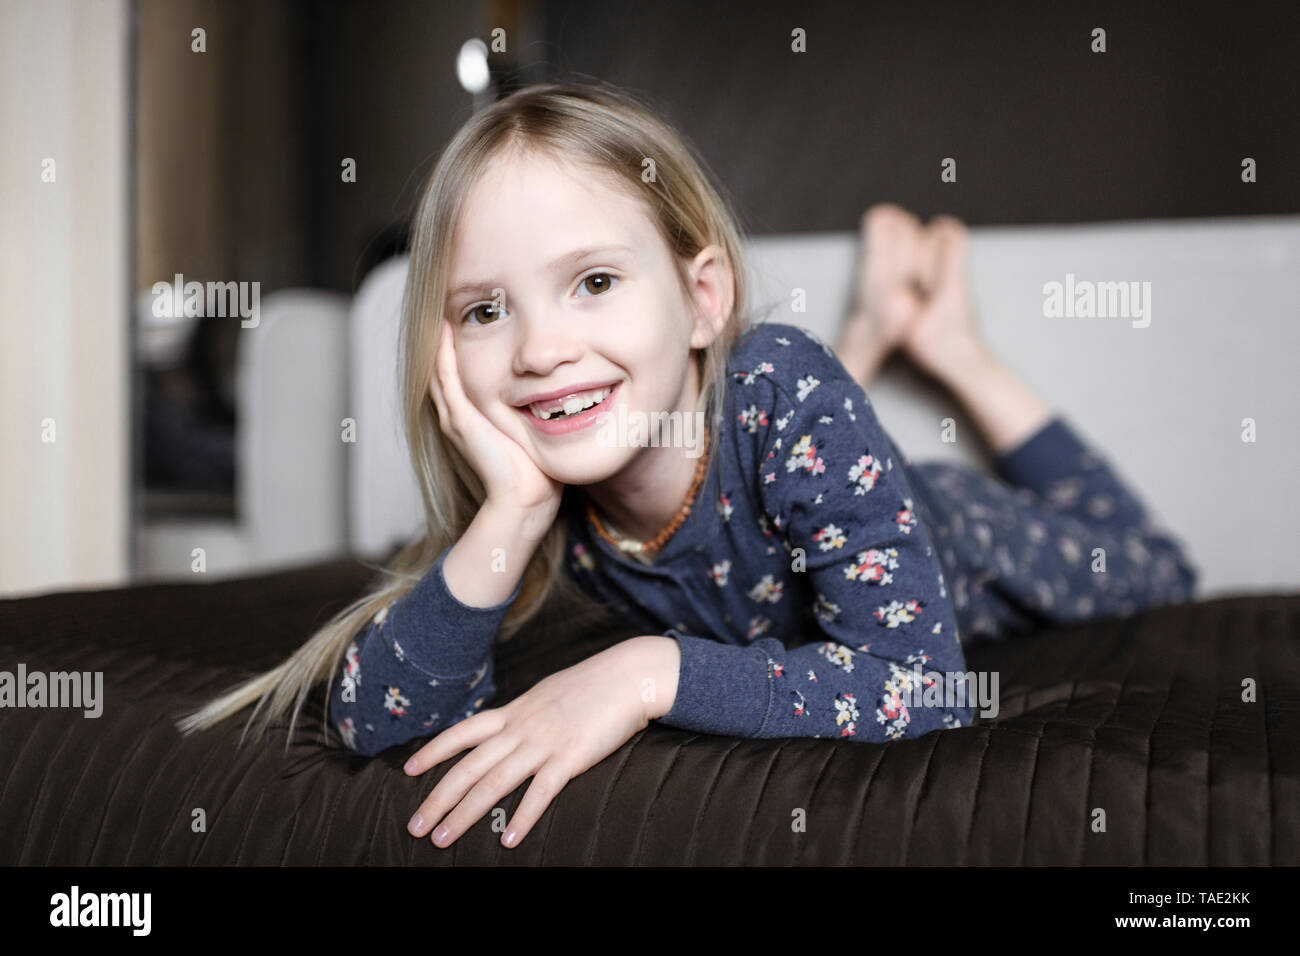 Portrait of smiling little Girl with tooth gap relaxing at home Banque D'Images